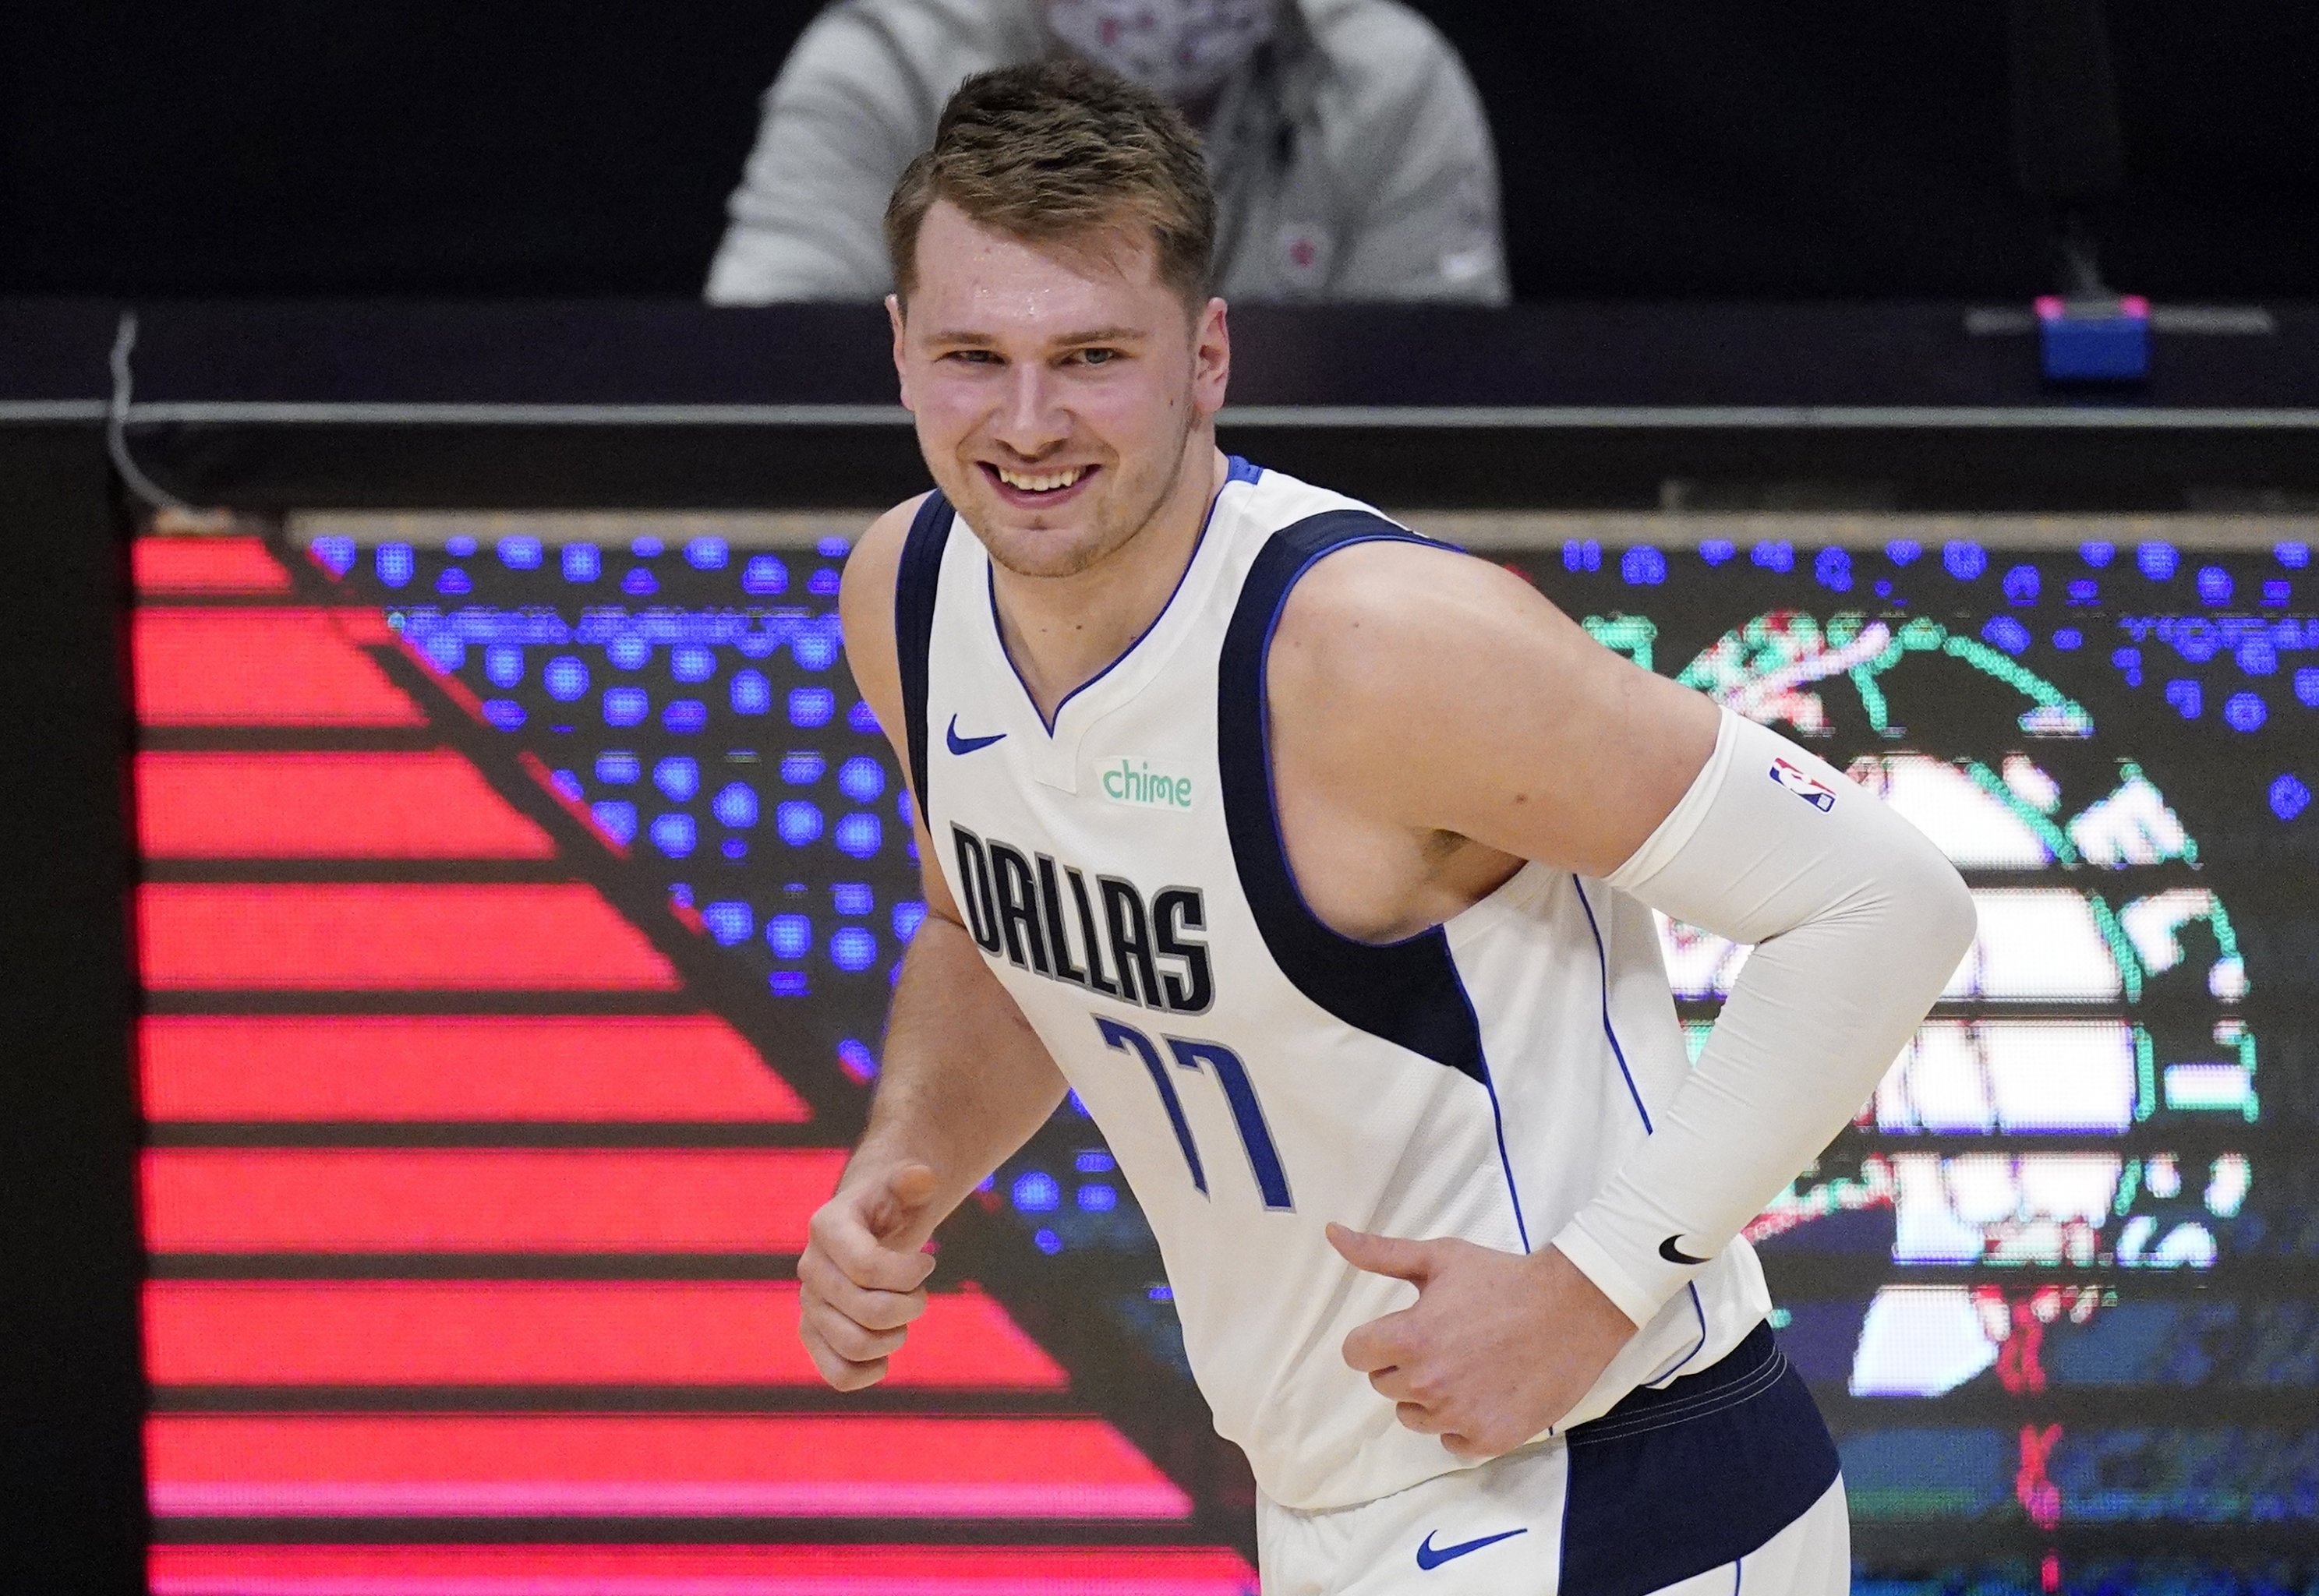 Luka Doncic is next in line among the most anticipated